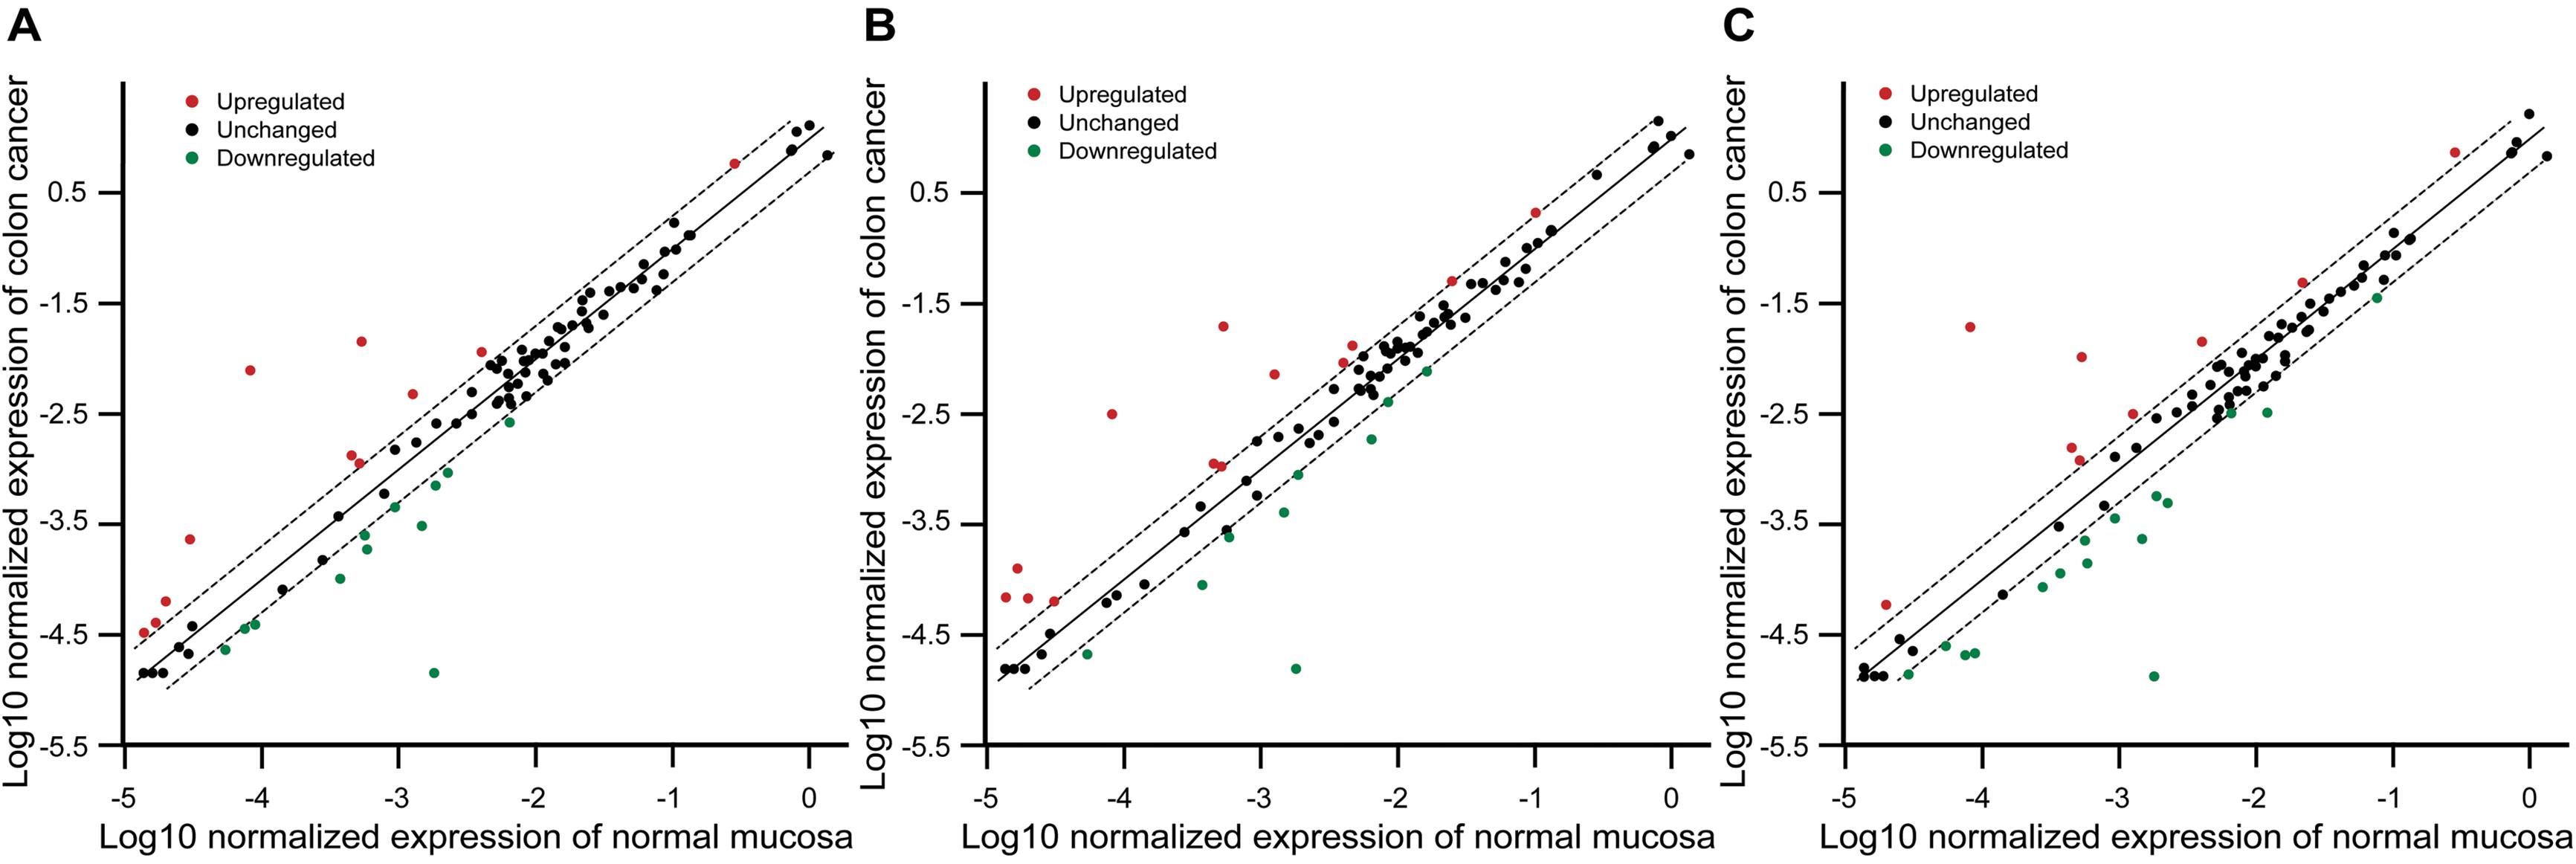 Comparison of gene expression between all colon cancer and normal mucosa (A), between early-stage colon cancer and normal mucosa (B) and between late-stage colon cancer and normal mucosa (C).